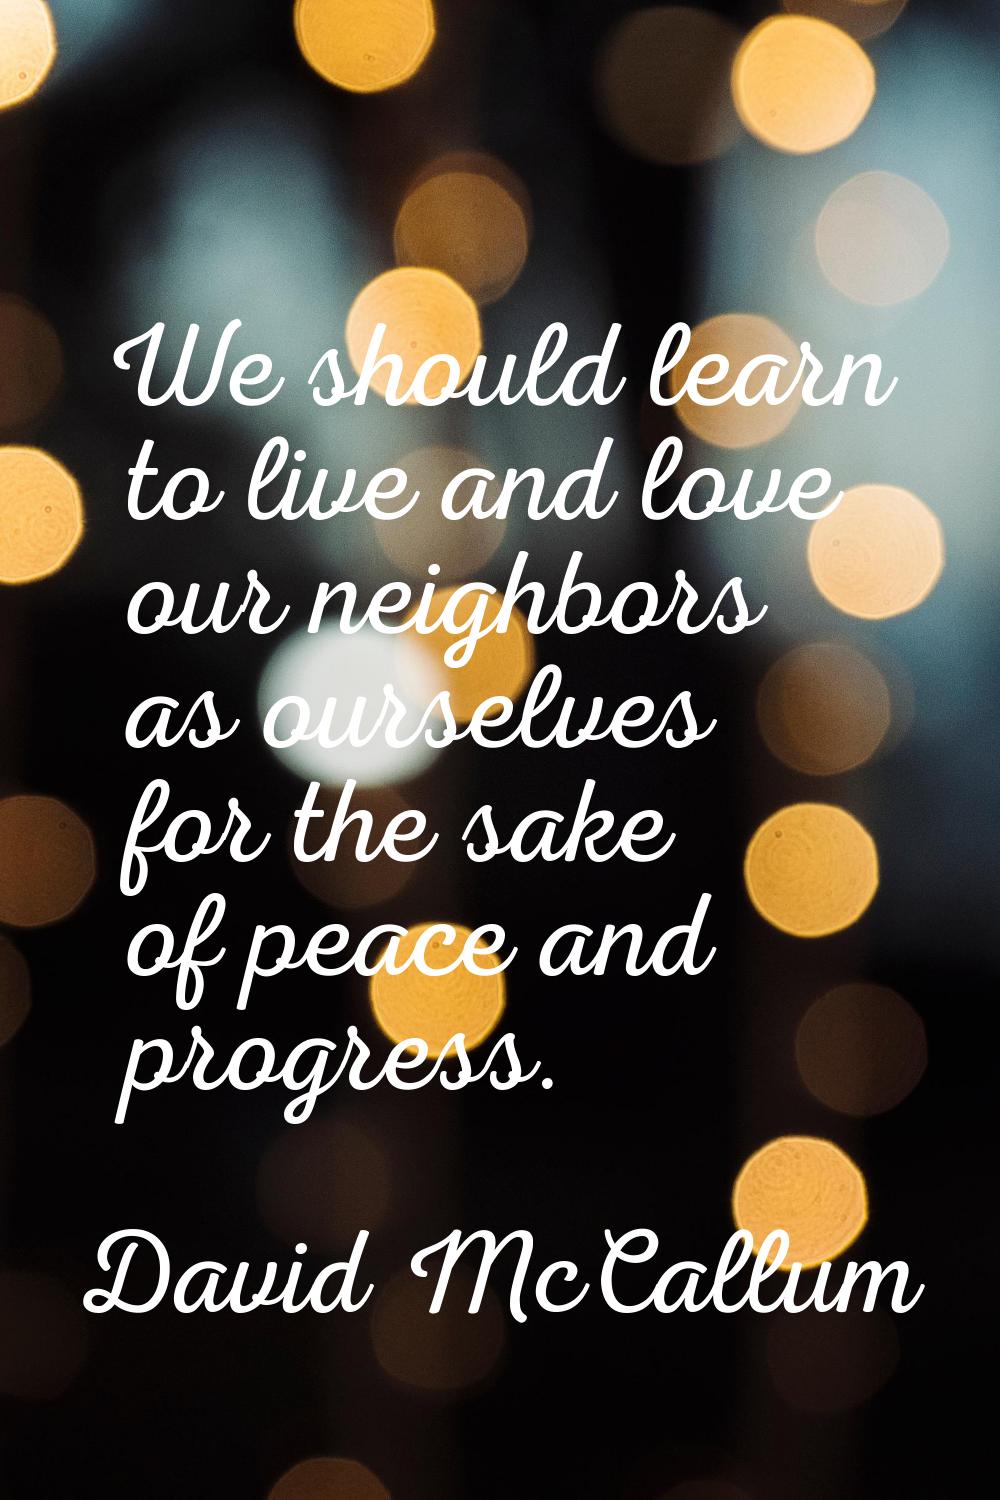 We should learn to live and love our neighbors as ourselves for the sake of peace and progress.